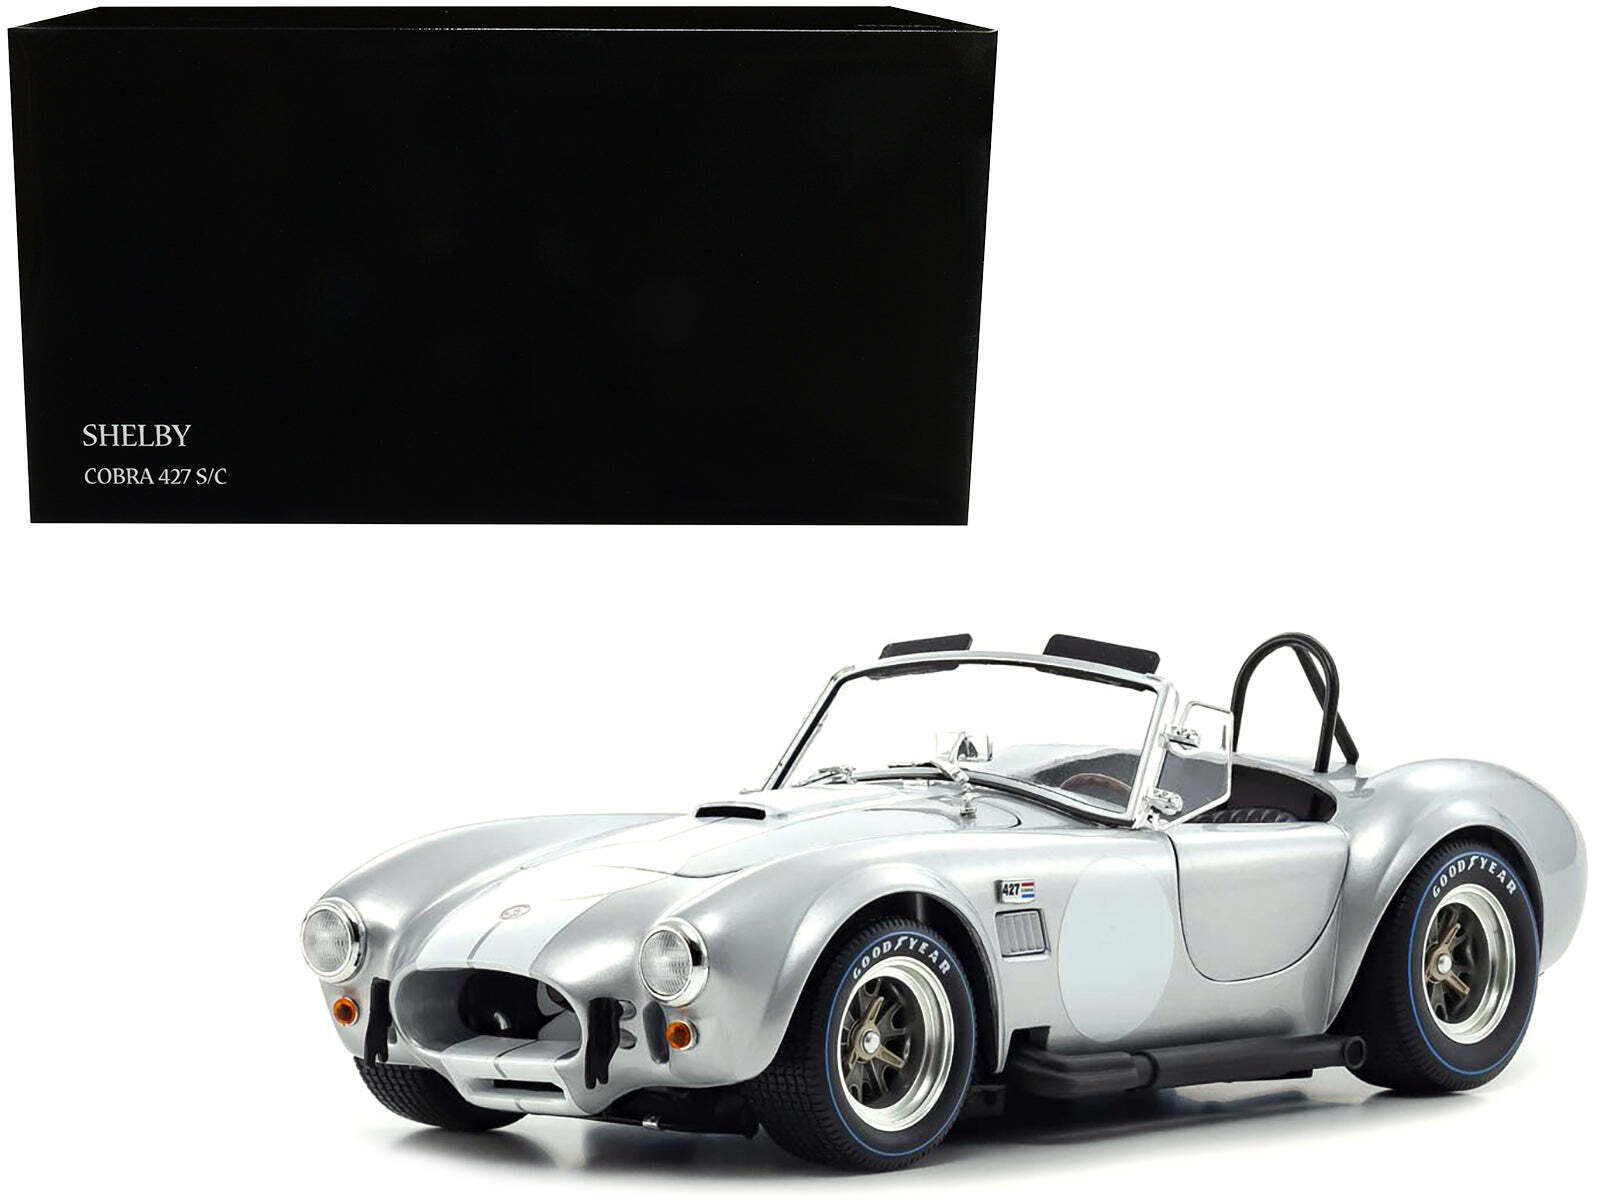 Shelby Cobra 427 S/C Silver Metallic with White Stripes 1/18 Diecast Model Car